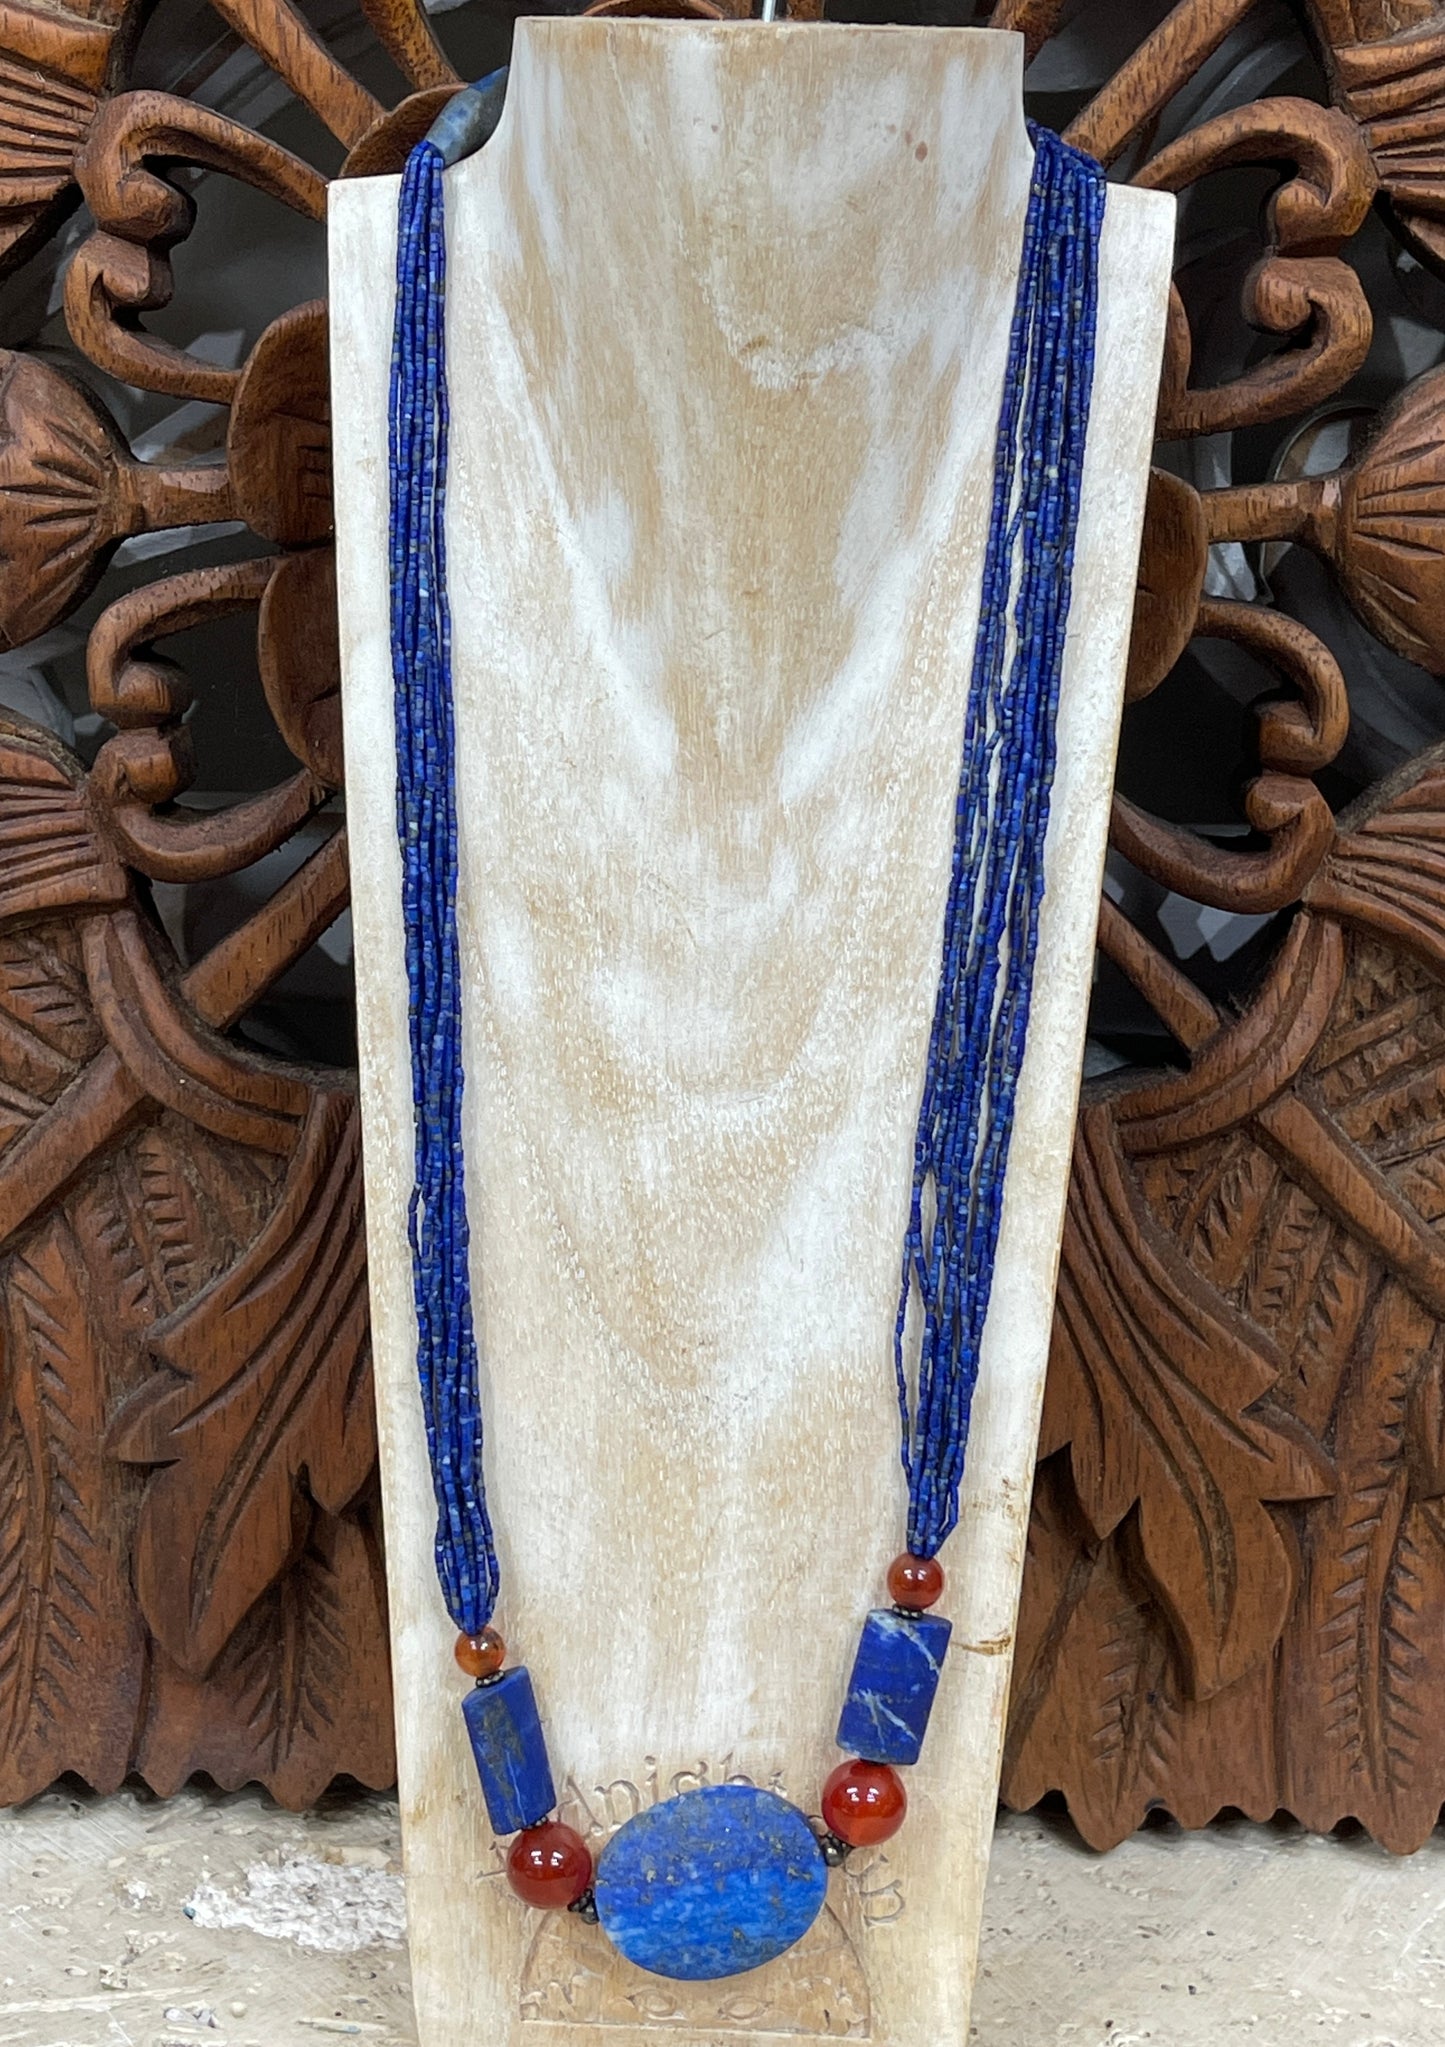 8 Strand Lapis and Carnelian Necklace